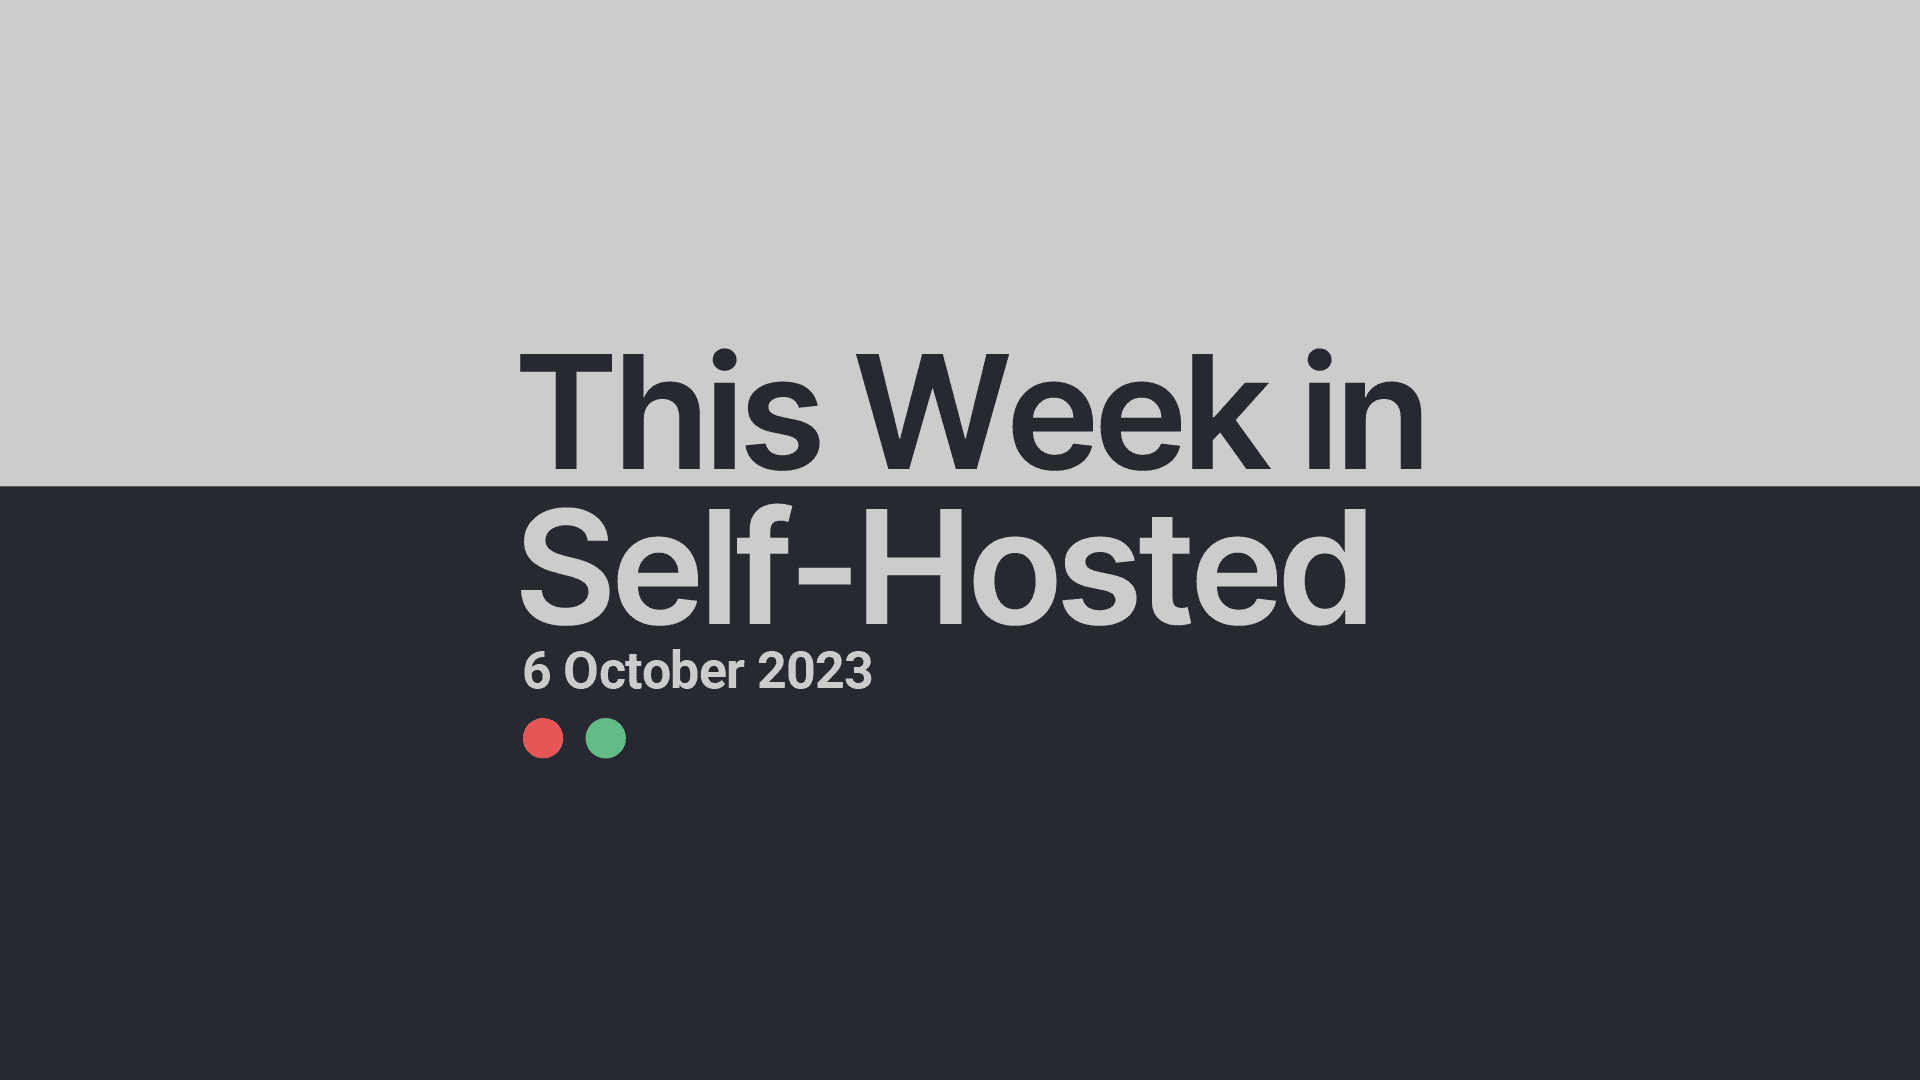 This Week in Self-Hosted (6 October 2023) Post image